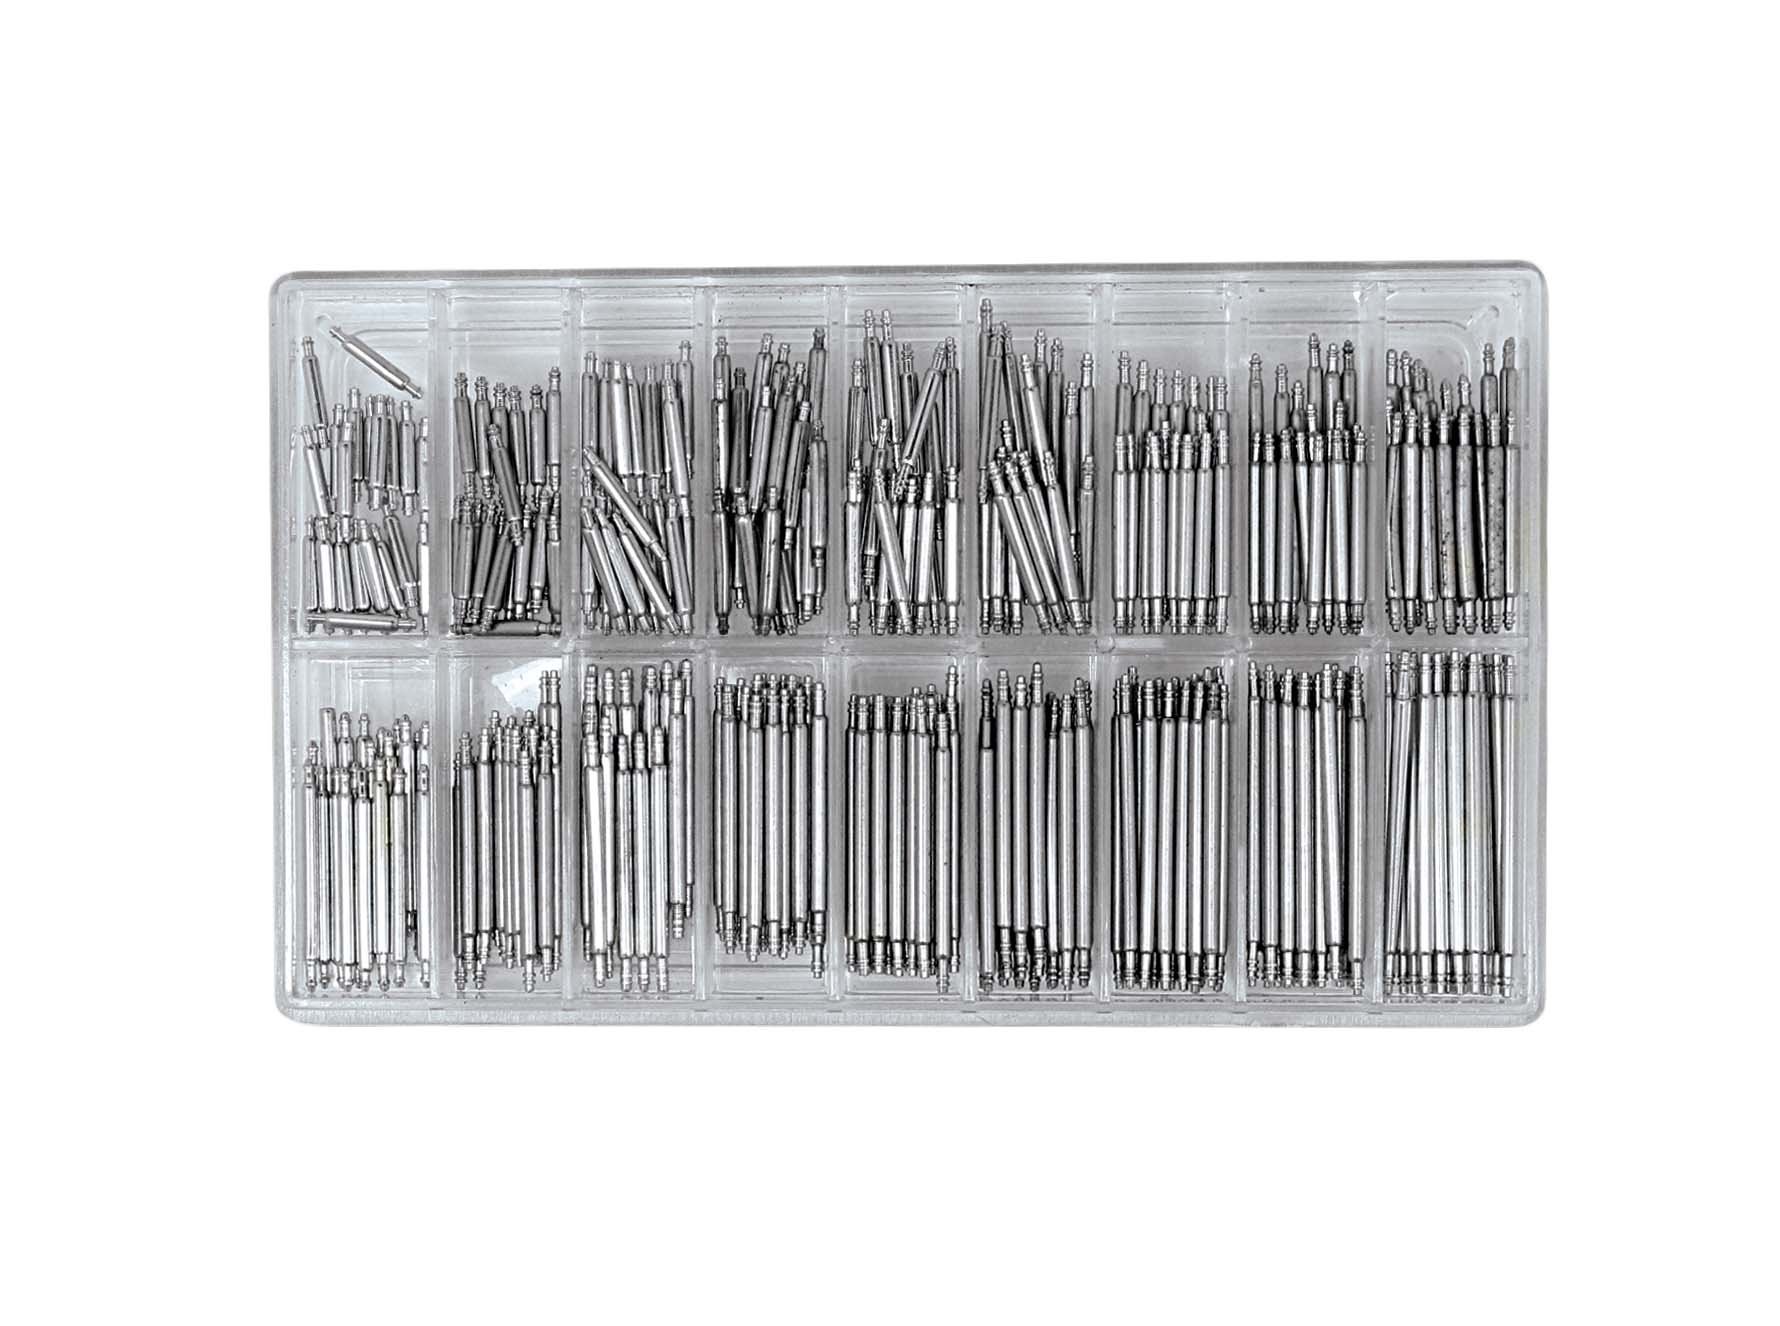 SE Professional Stainless Steel Spring Bar Set (360 PC.) - JT6322WP